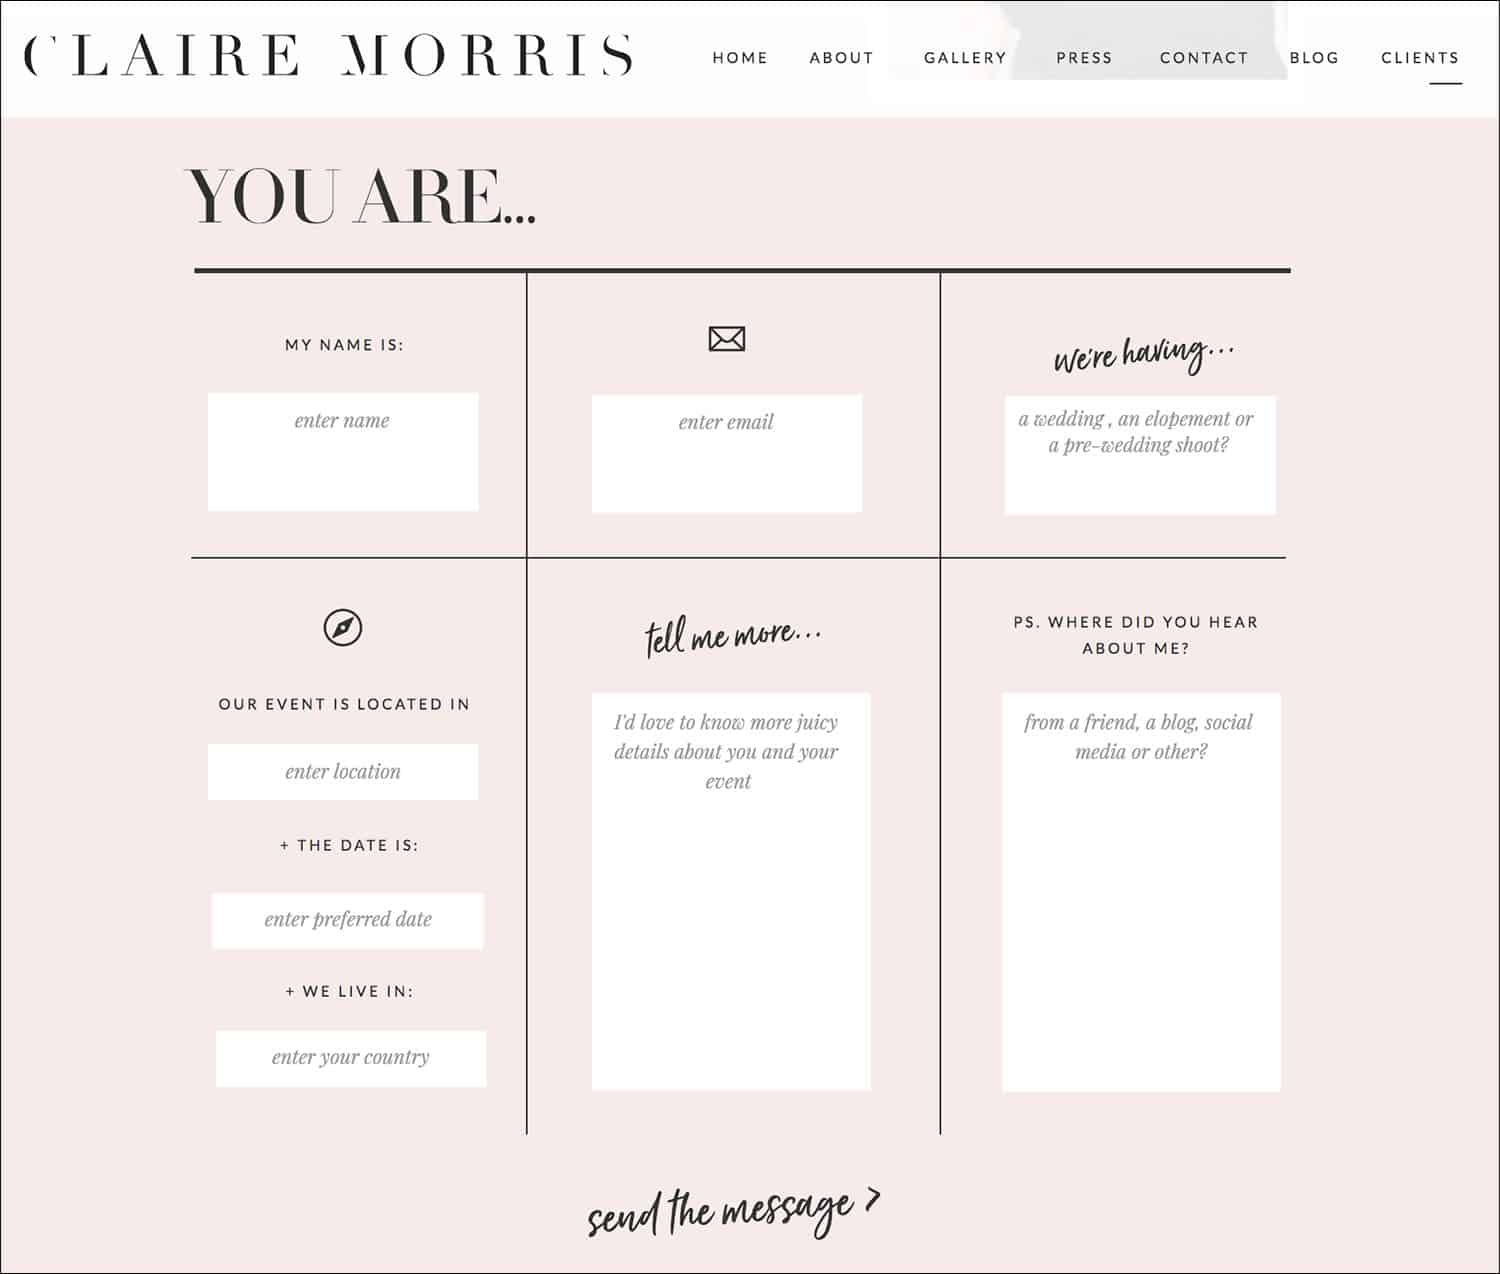 How To Make A Photography Website Your Dream Clients Can’t Resist: Claire Morris' contact form is a genius example of brand intermingling with a clear call to action.